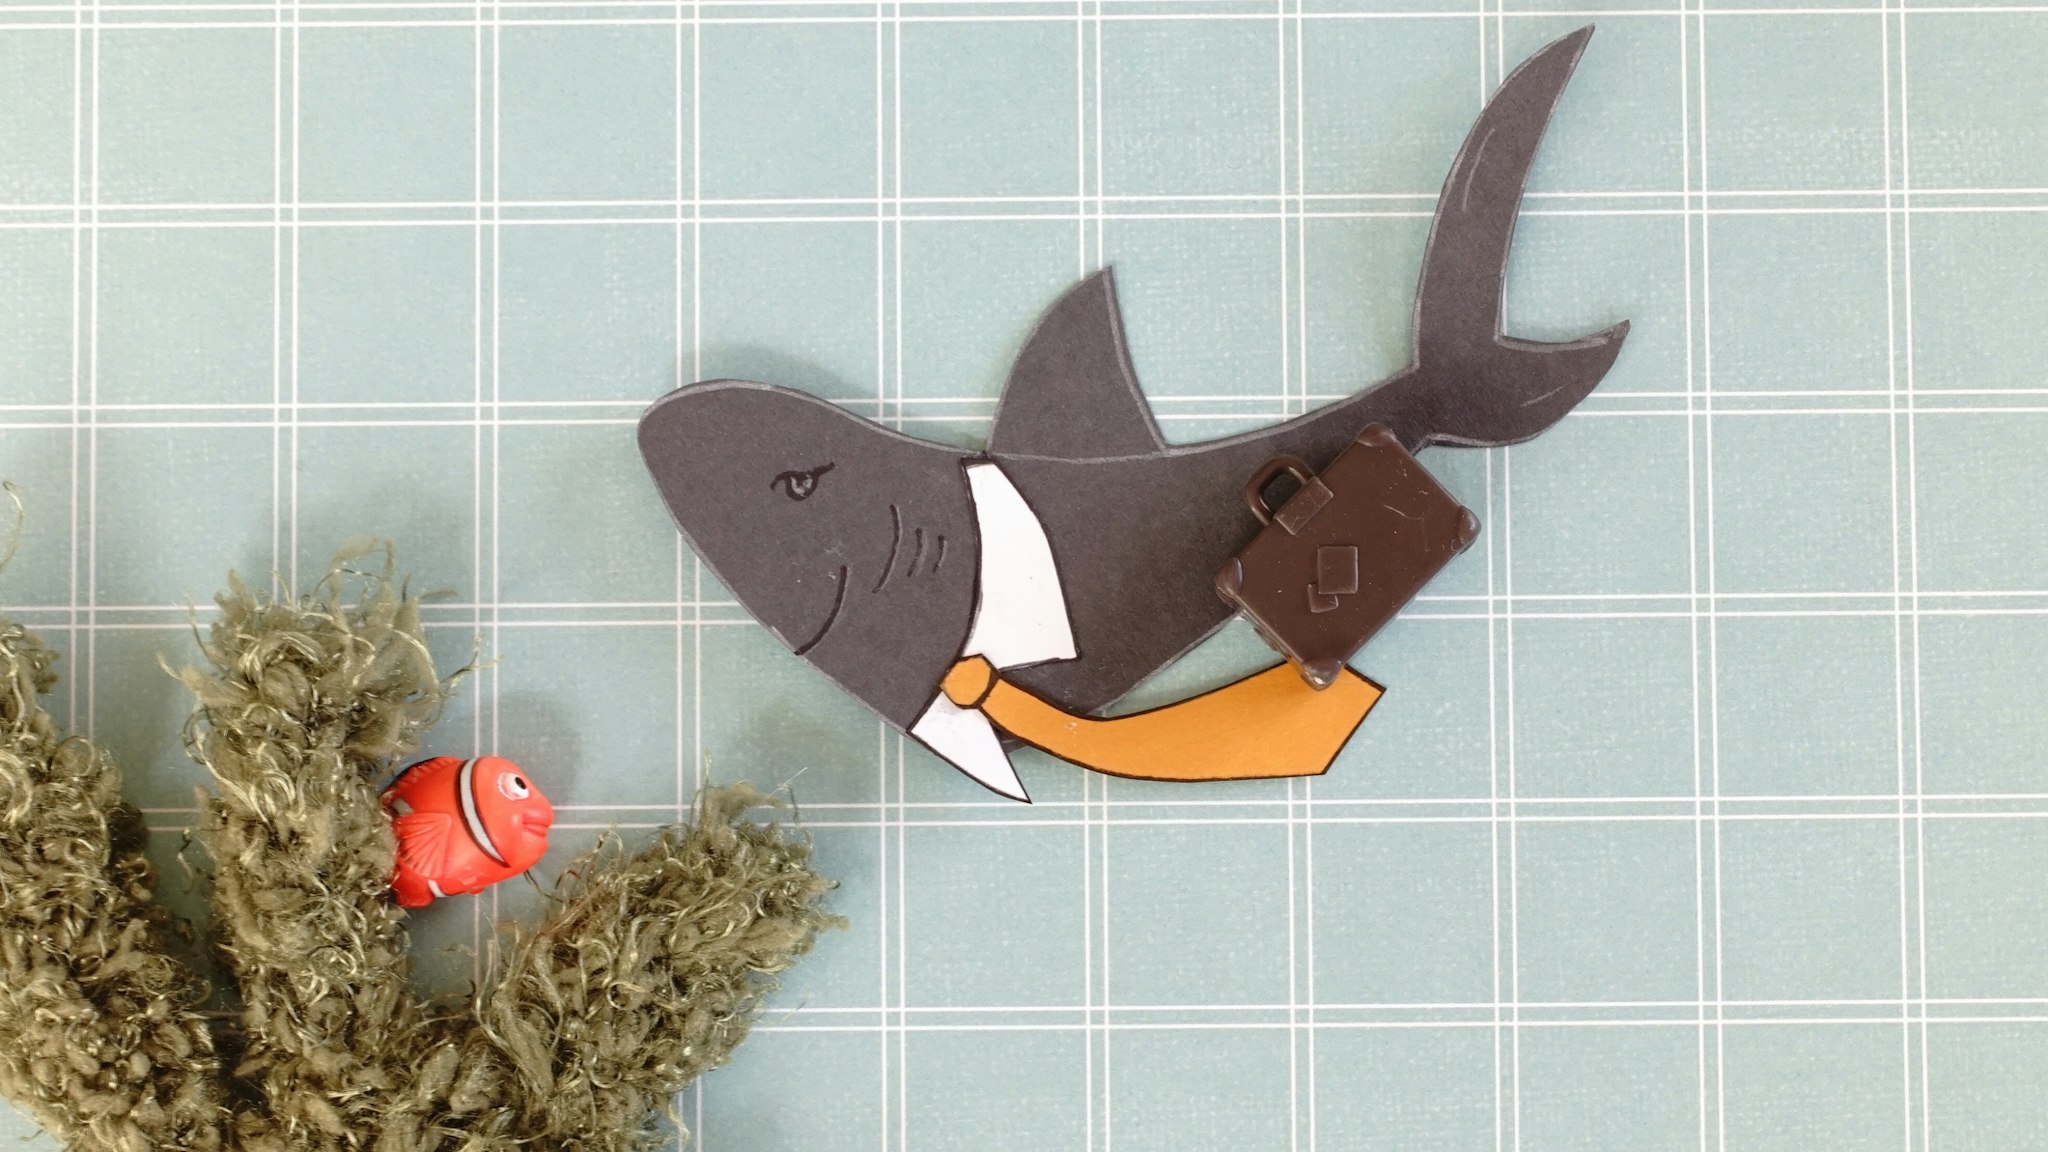 Merged mediums. Loan shark. Paper illustration of a shark in a white collar and tie holding a plastic case looking down on a small clown fish looking out of knitted seaweed.